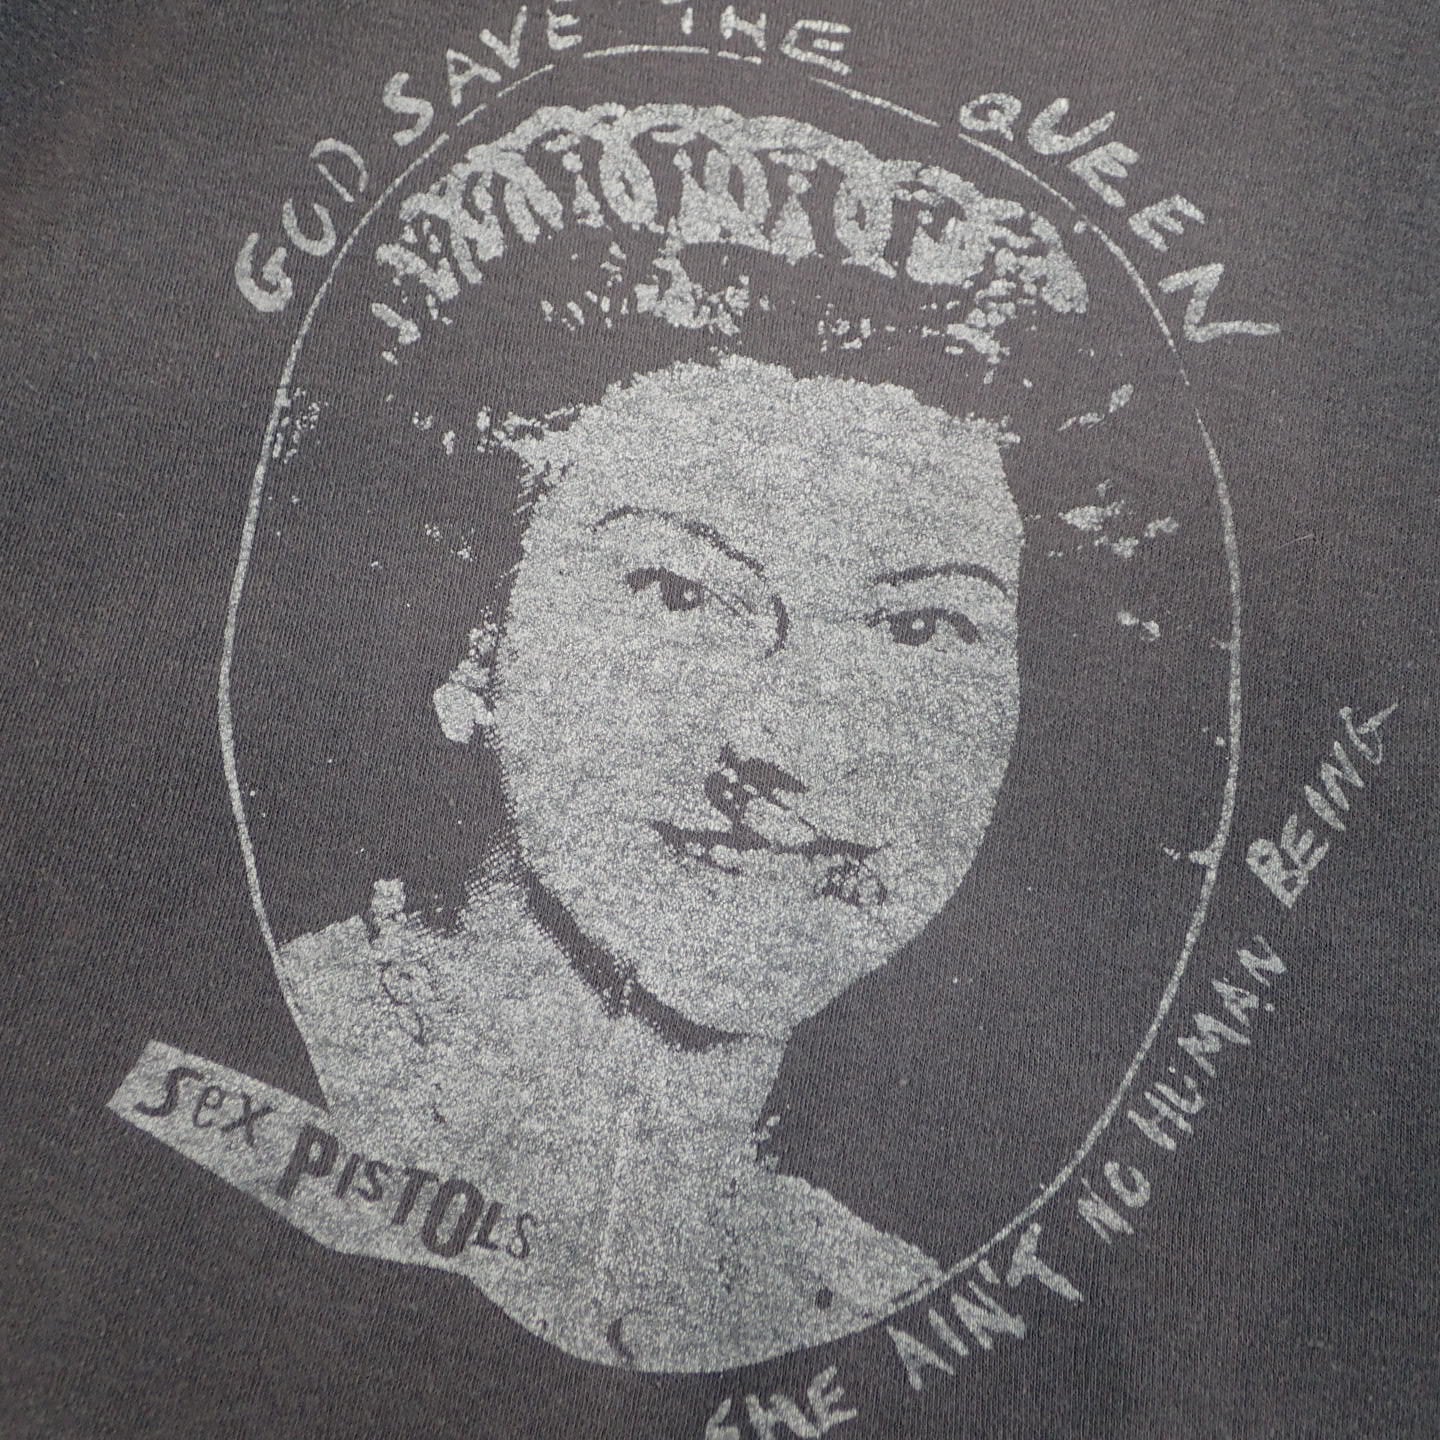 70s Sex Pistols T-shirt "God Save The Queen Tee"